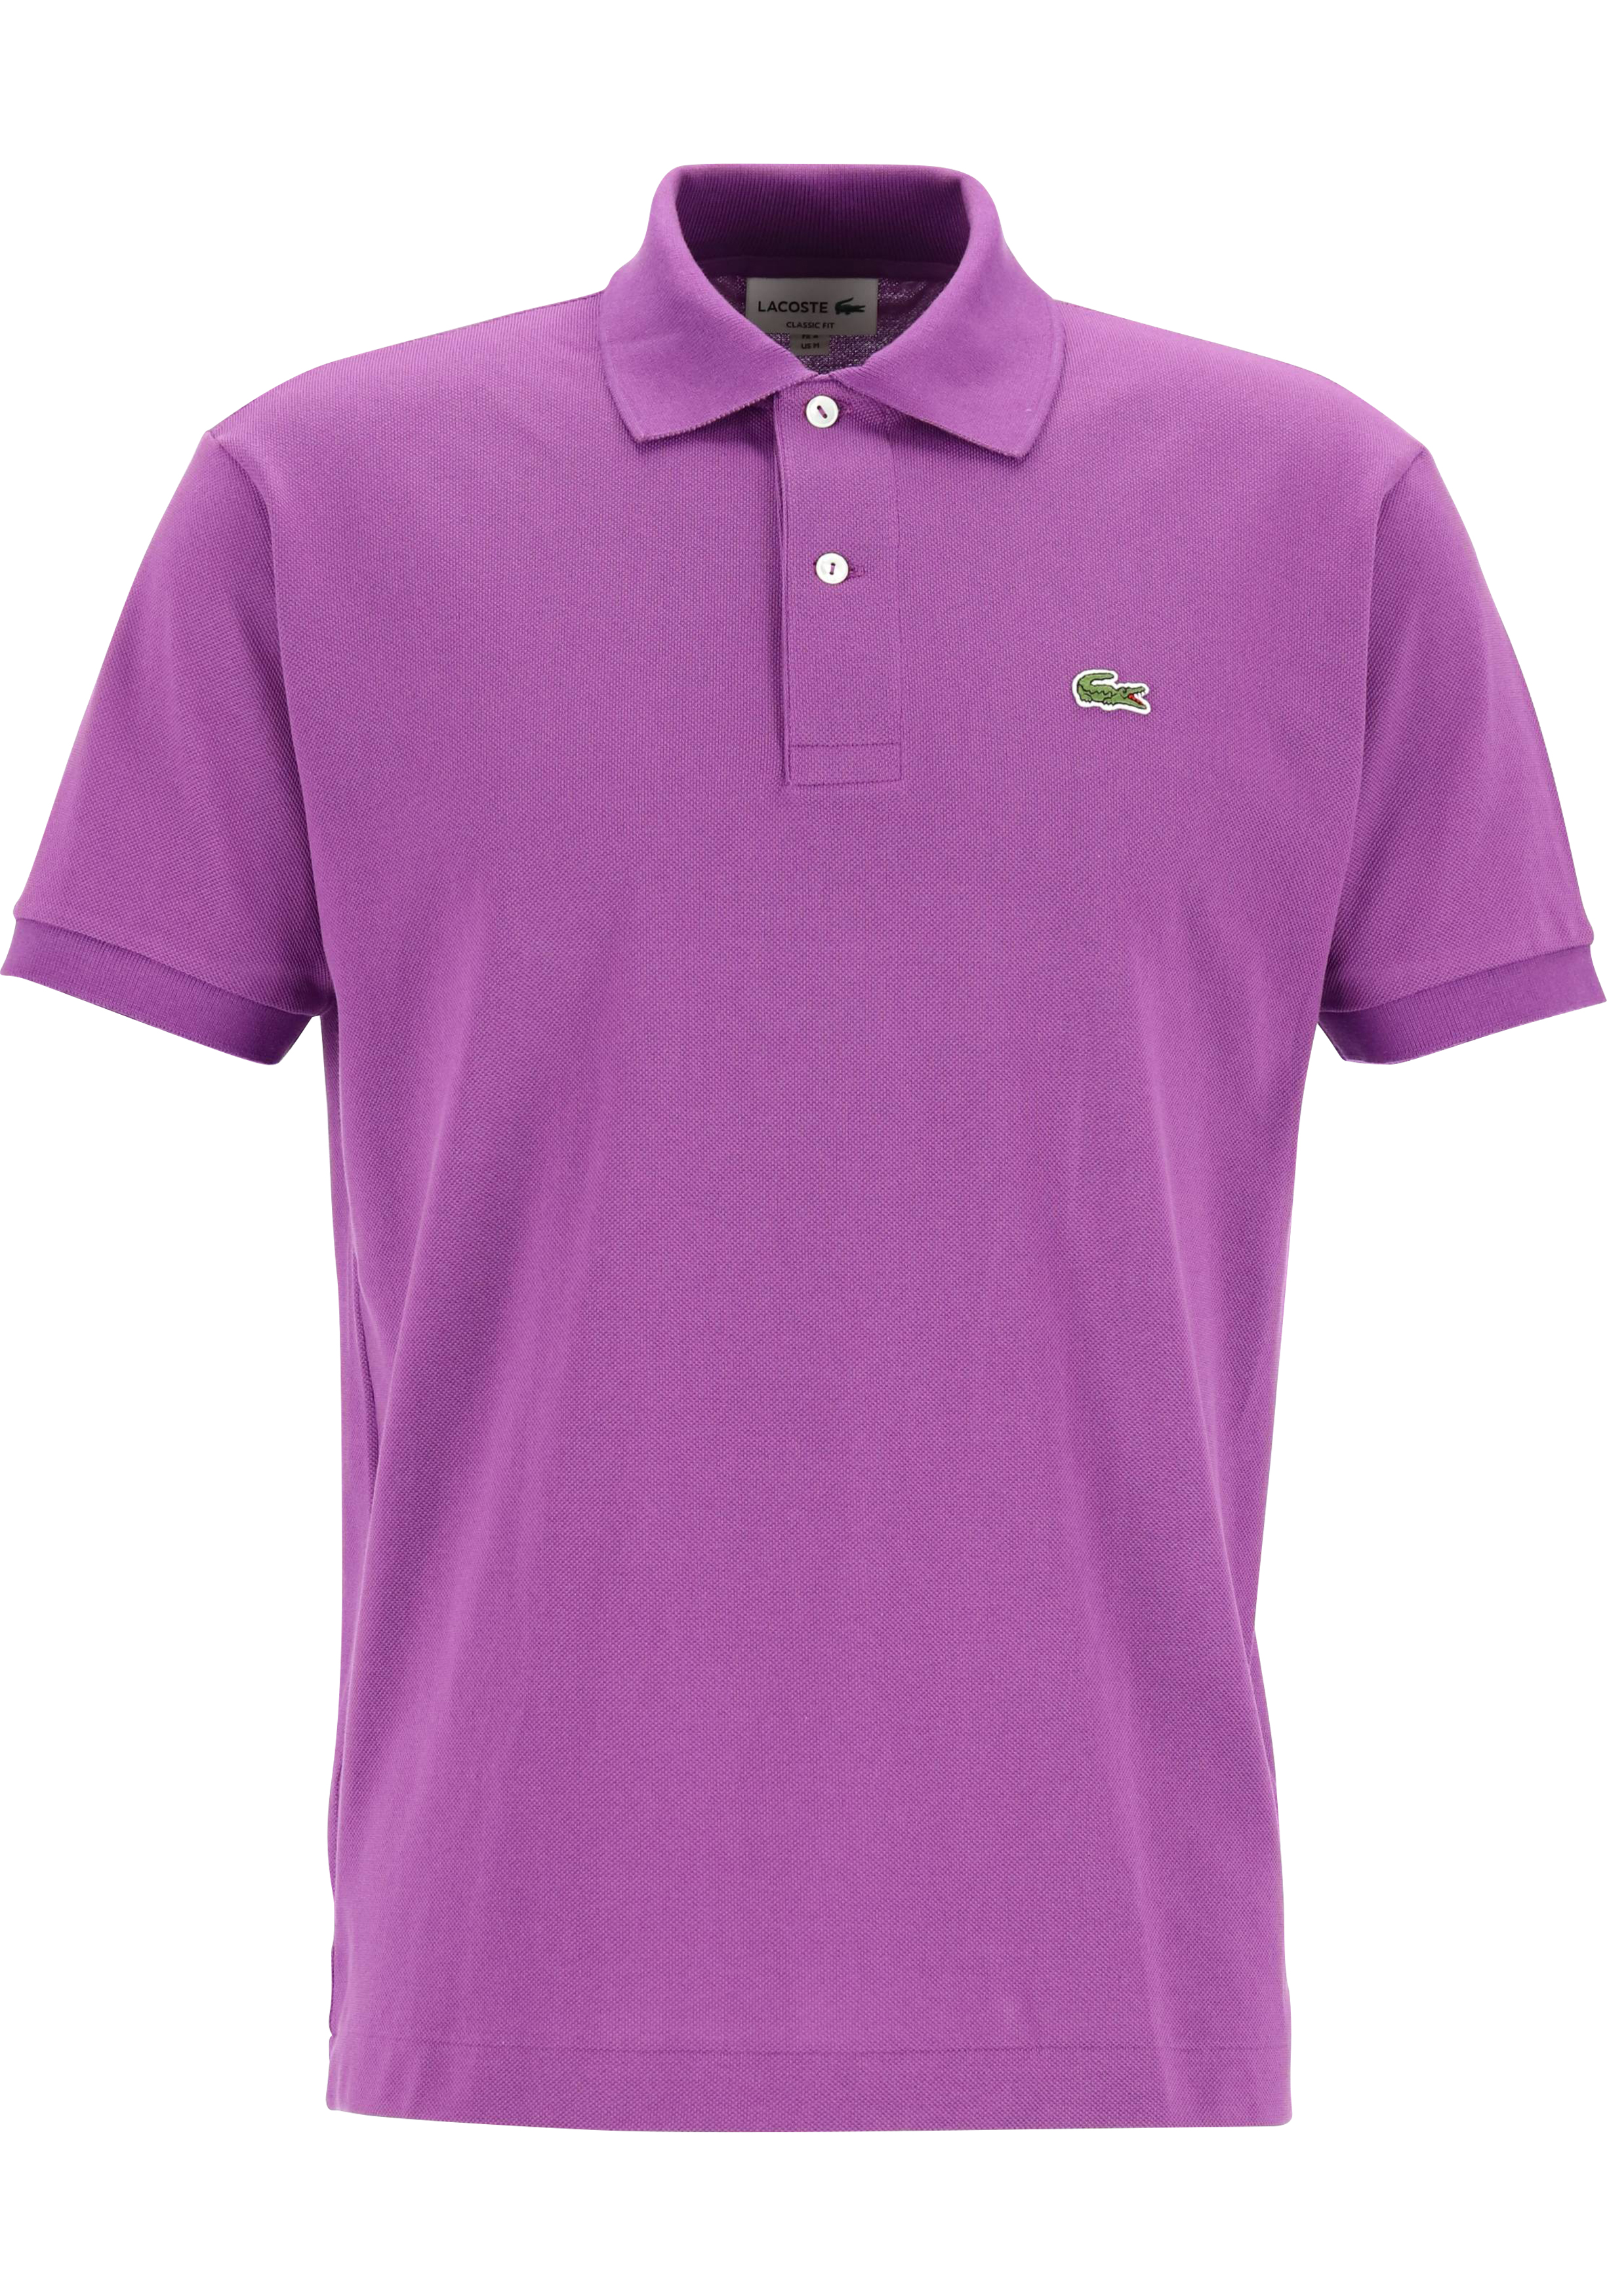 Lacoste Classic Fit polo, mauve paars